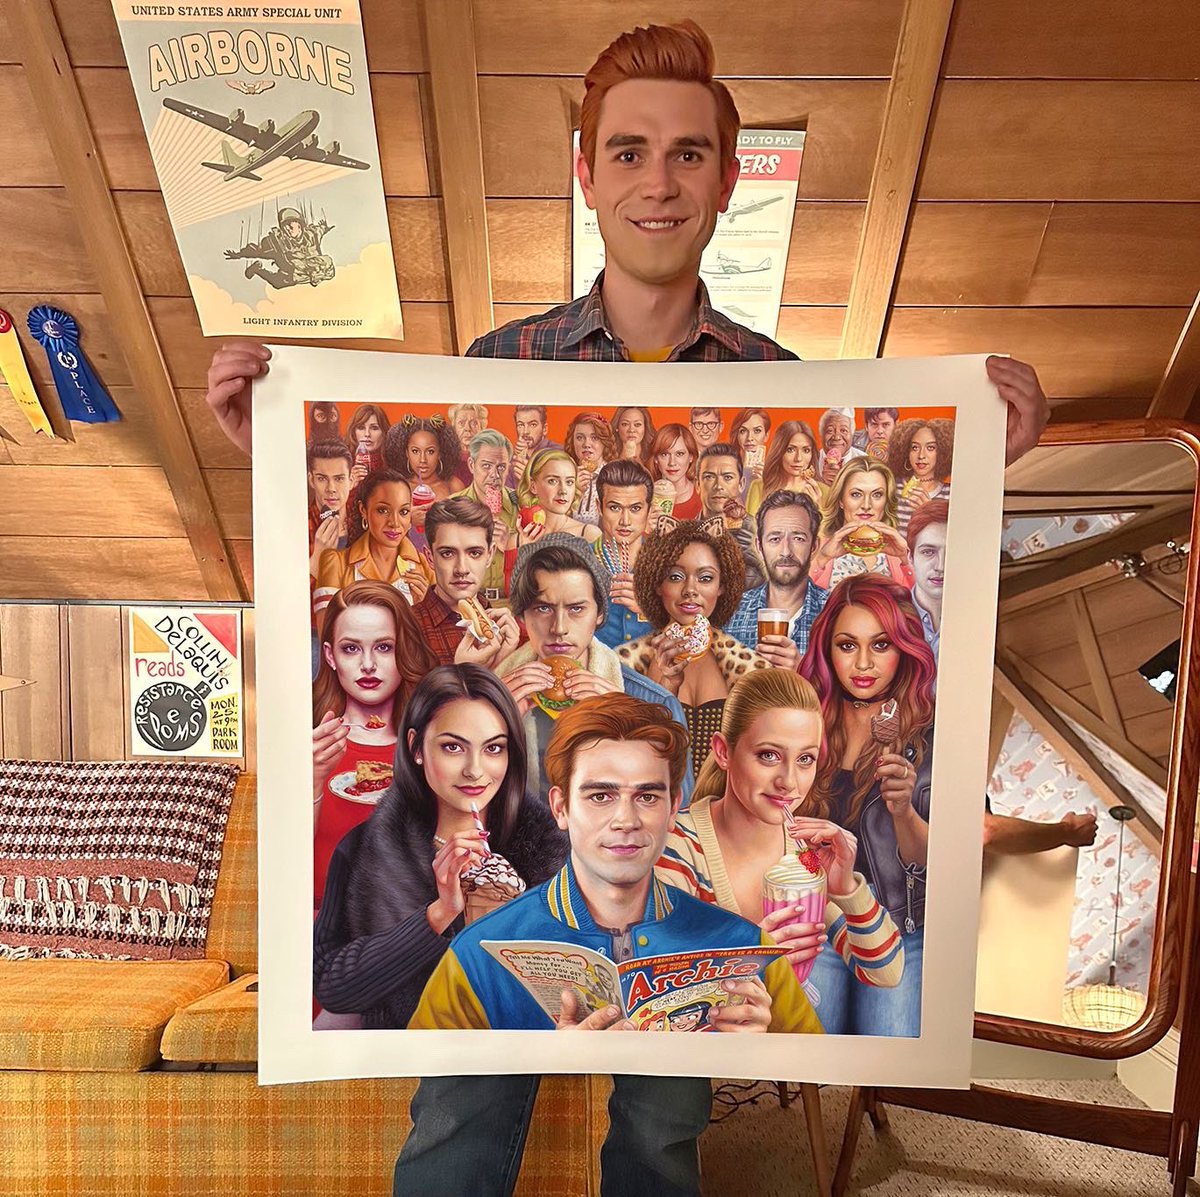 these will be dropping on wednesday over at the artofalexgross.com webstore at 9am pdt. each member of the Riverdale cast will also be receiving one to commemorate seven amazing seasons! special thanks to KJ Apa and @WriterRAS for this! #Riverdale #archieandrews